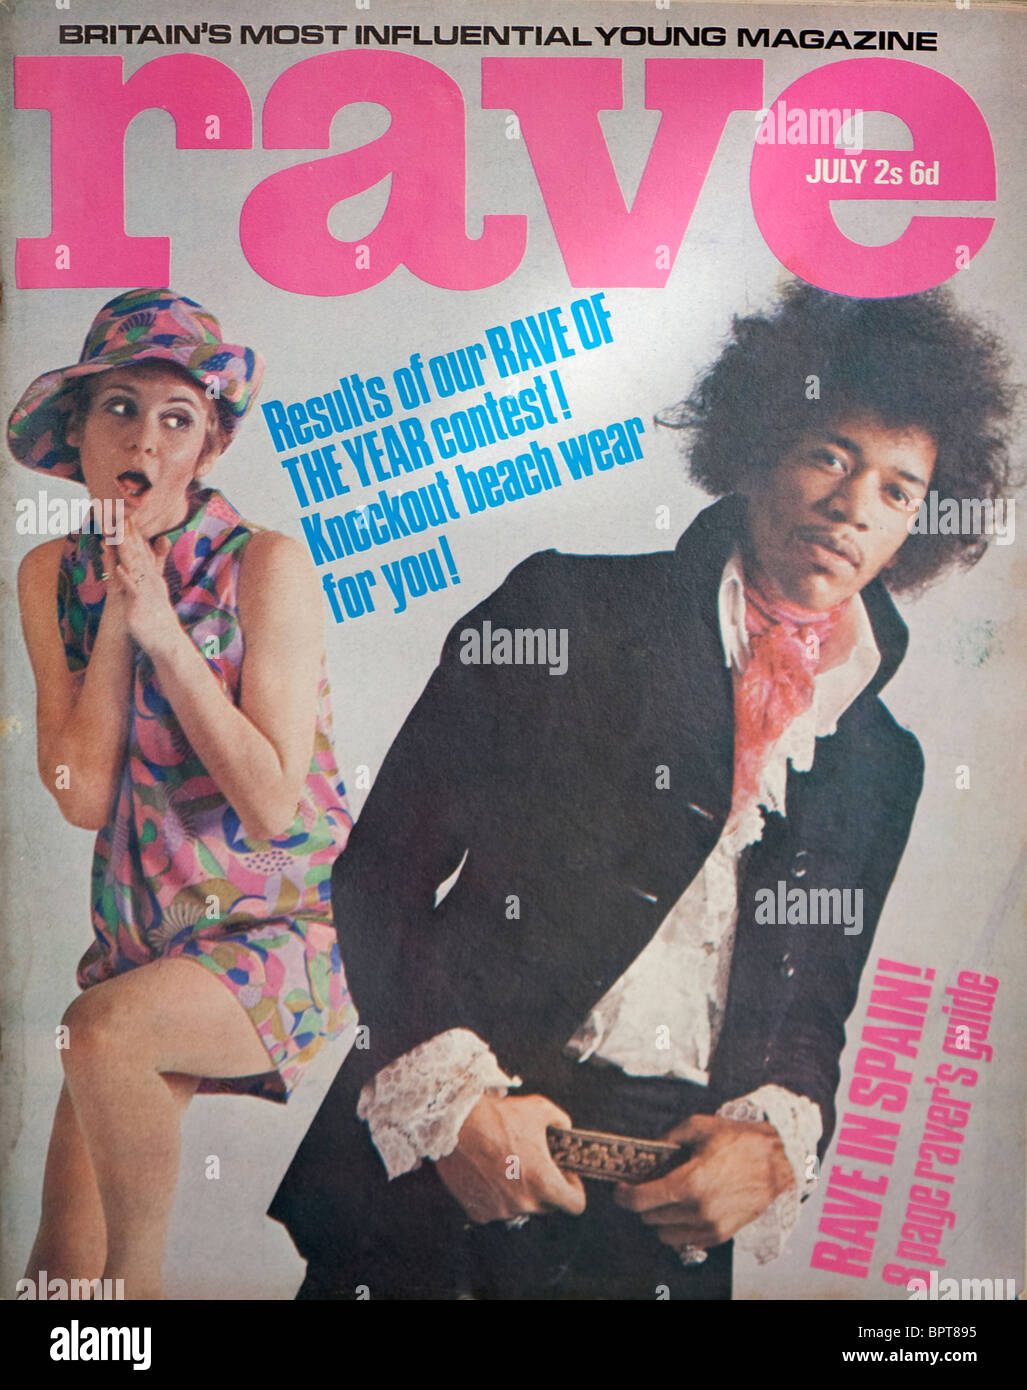 Cover of the Sixties magazine Rave with Jimmy Hendrix. Stock Photo